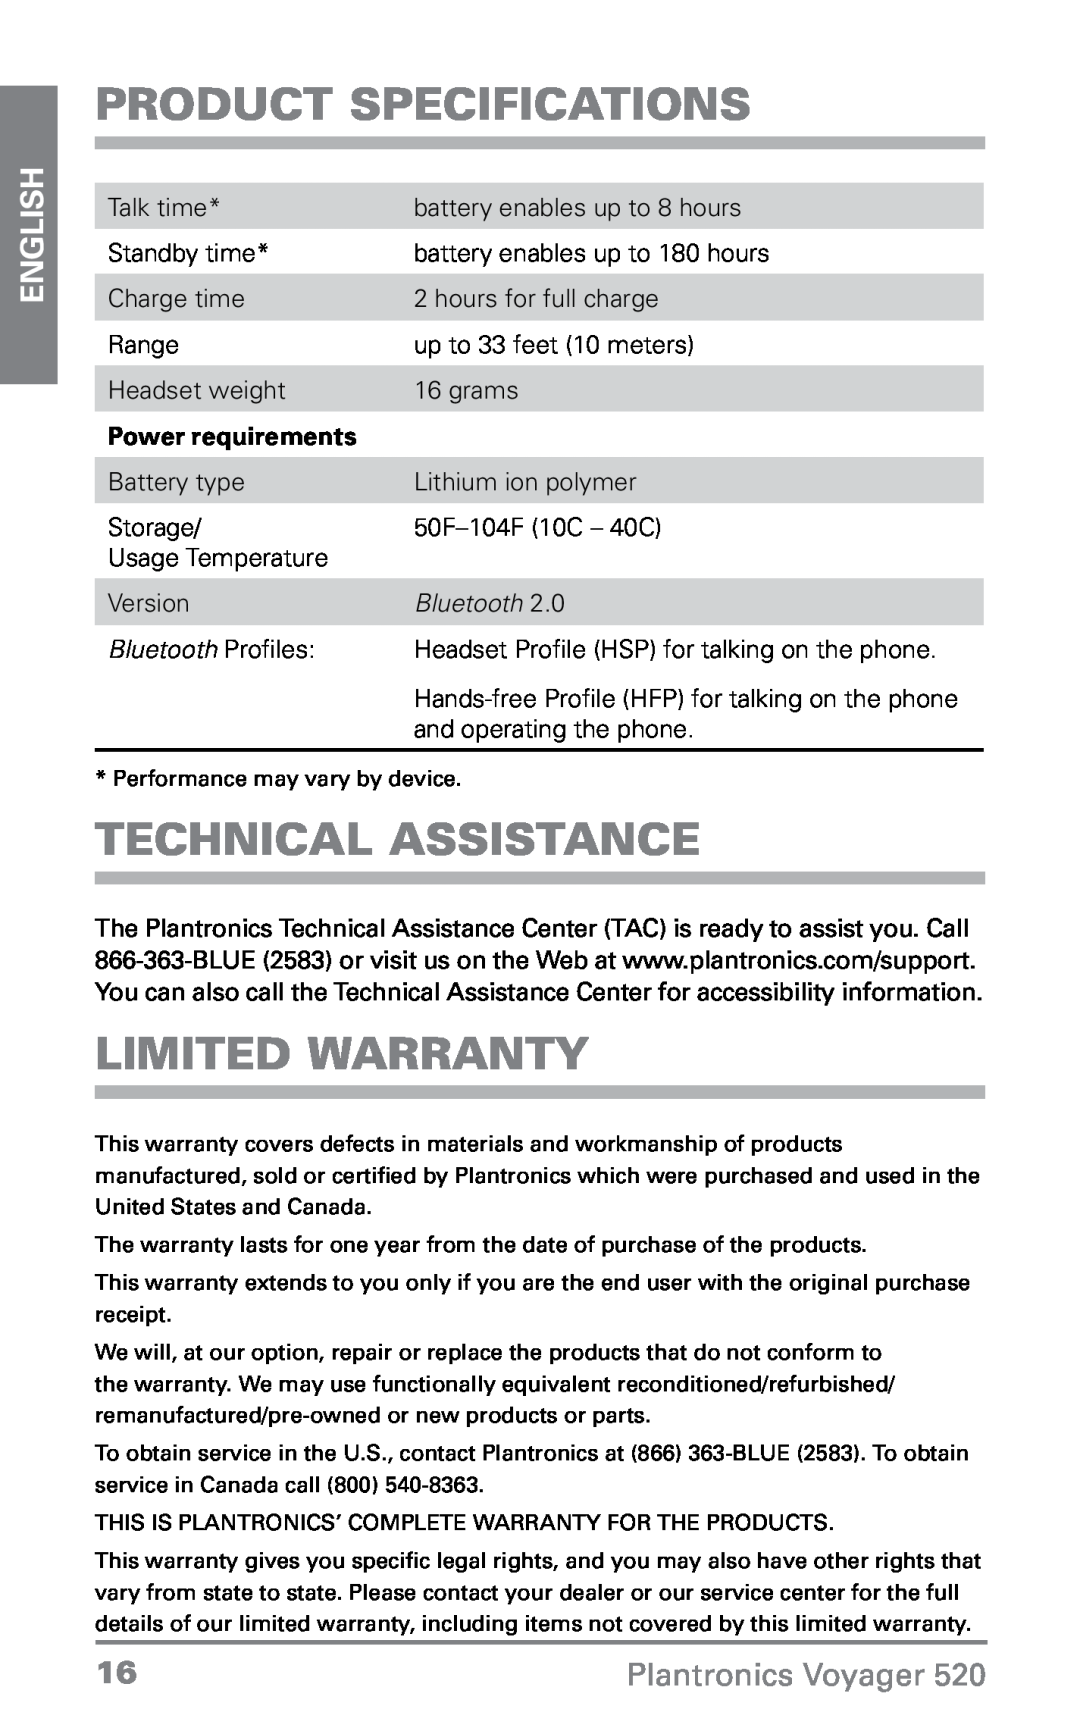 Plantronics 520 Product Specifications, Technical Assistance, Limited Warranty, Power requirements, Bluetooth, English 